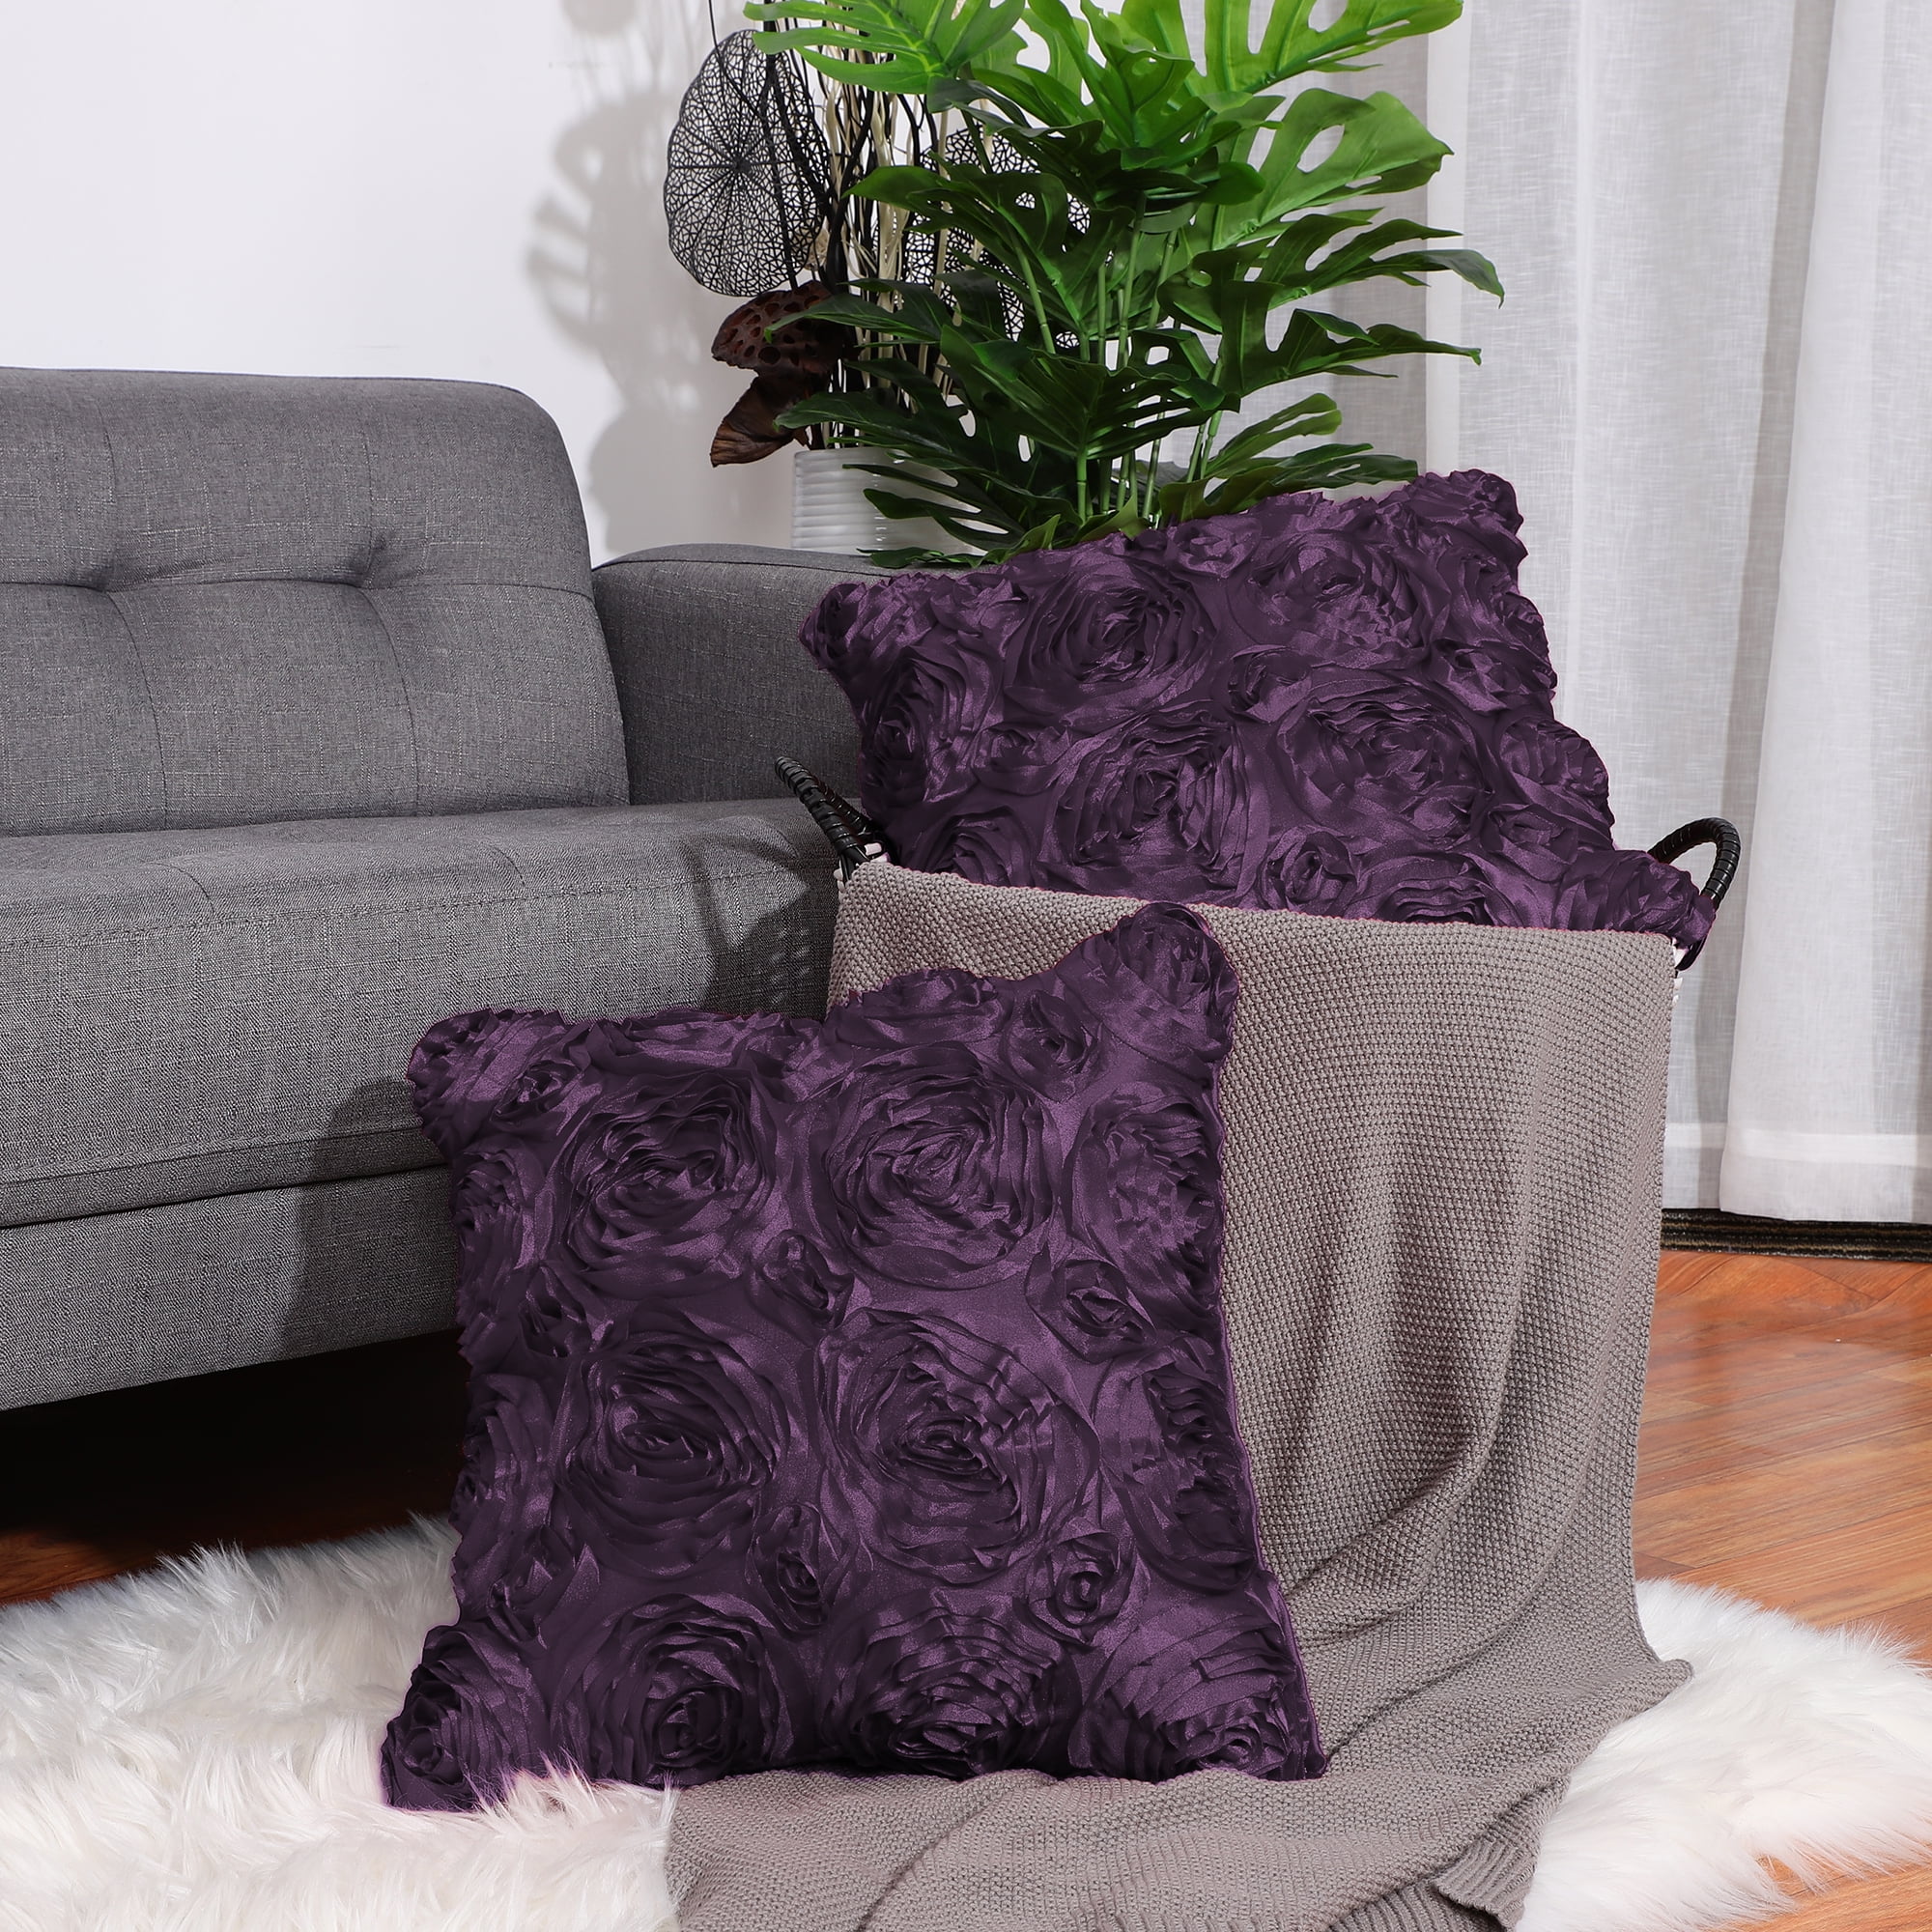 2pcs 3D Satin Rose Flower Throw Pillow Cover Shells.Pure Floral Cushion  Covers for Couch Sofa.16 x 16. Purple